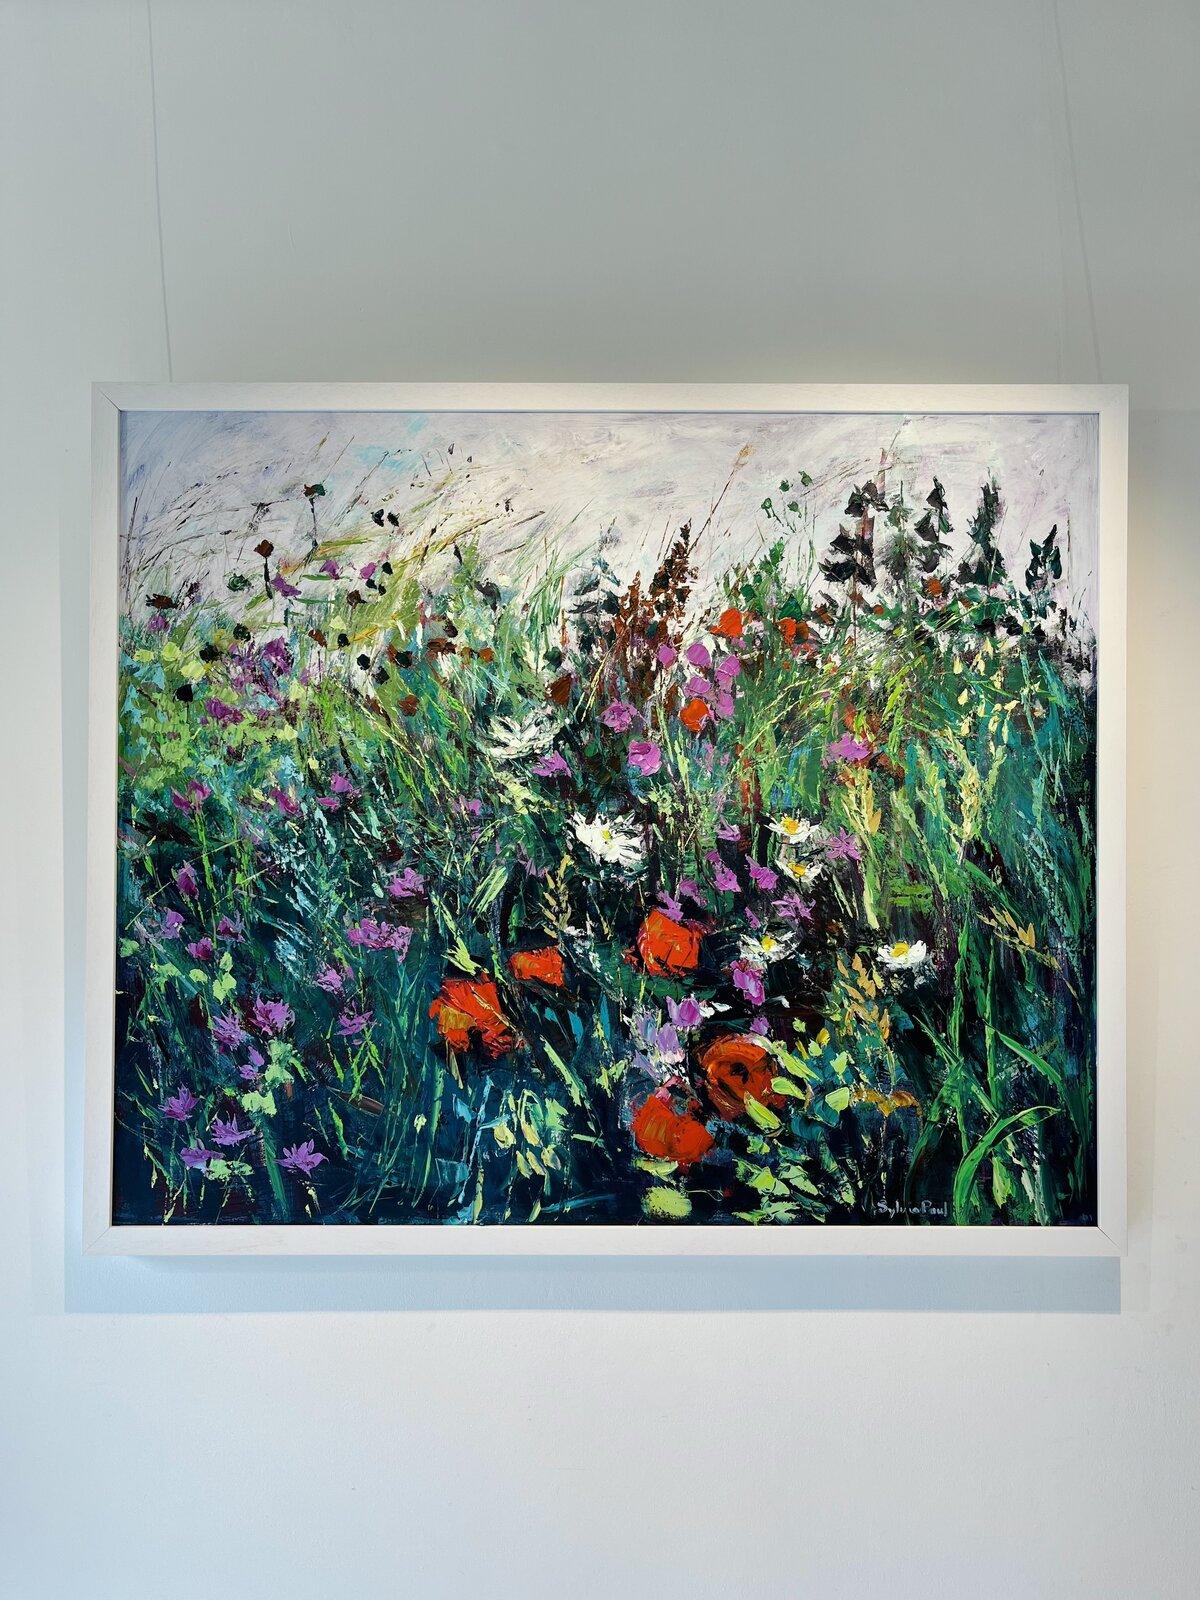 Wild Flower Meadow-original abstract floral landscape painting-contemporary art - Painting by Sylvia Paul